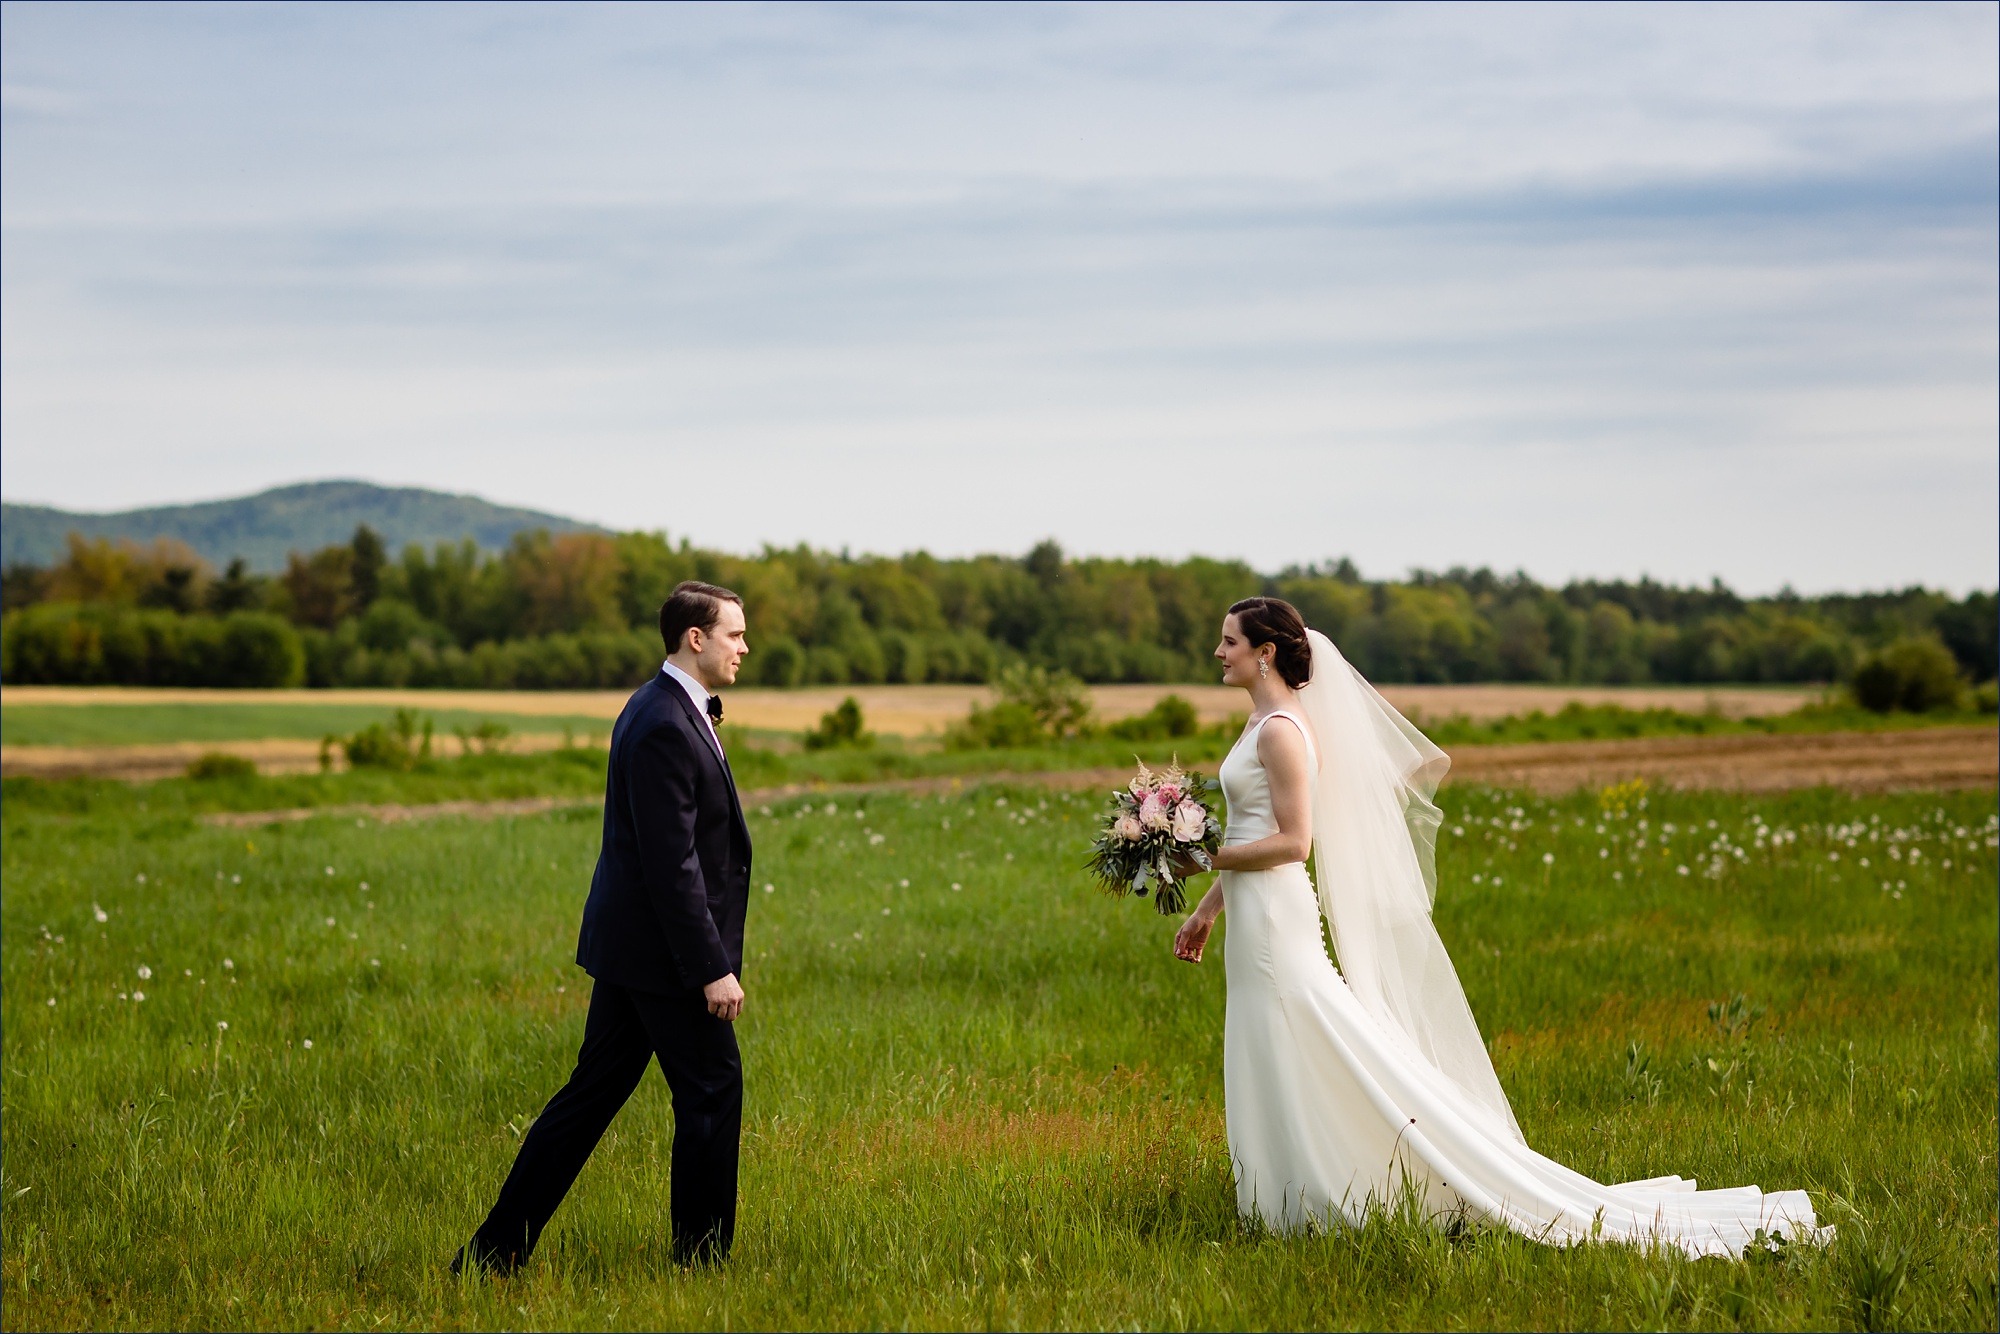 Hardy Farm wedding with the bride and groom approaching one another in a field in front of the White Mountains